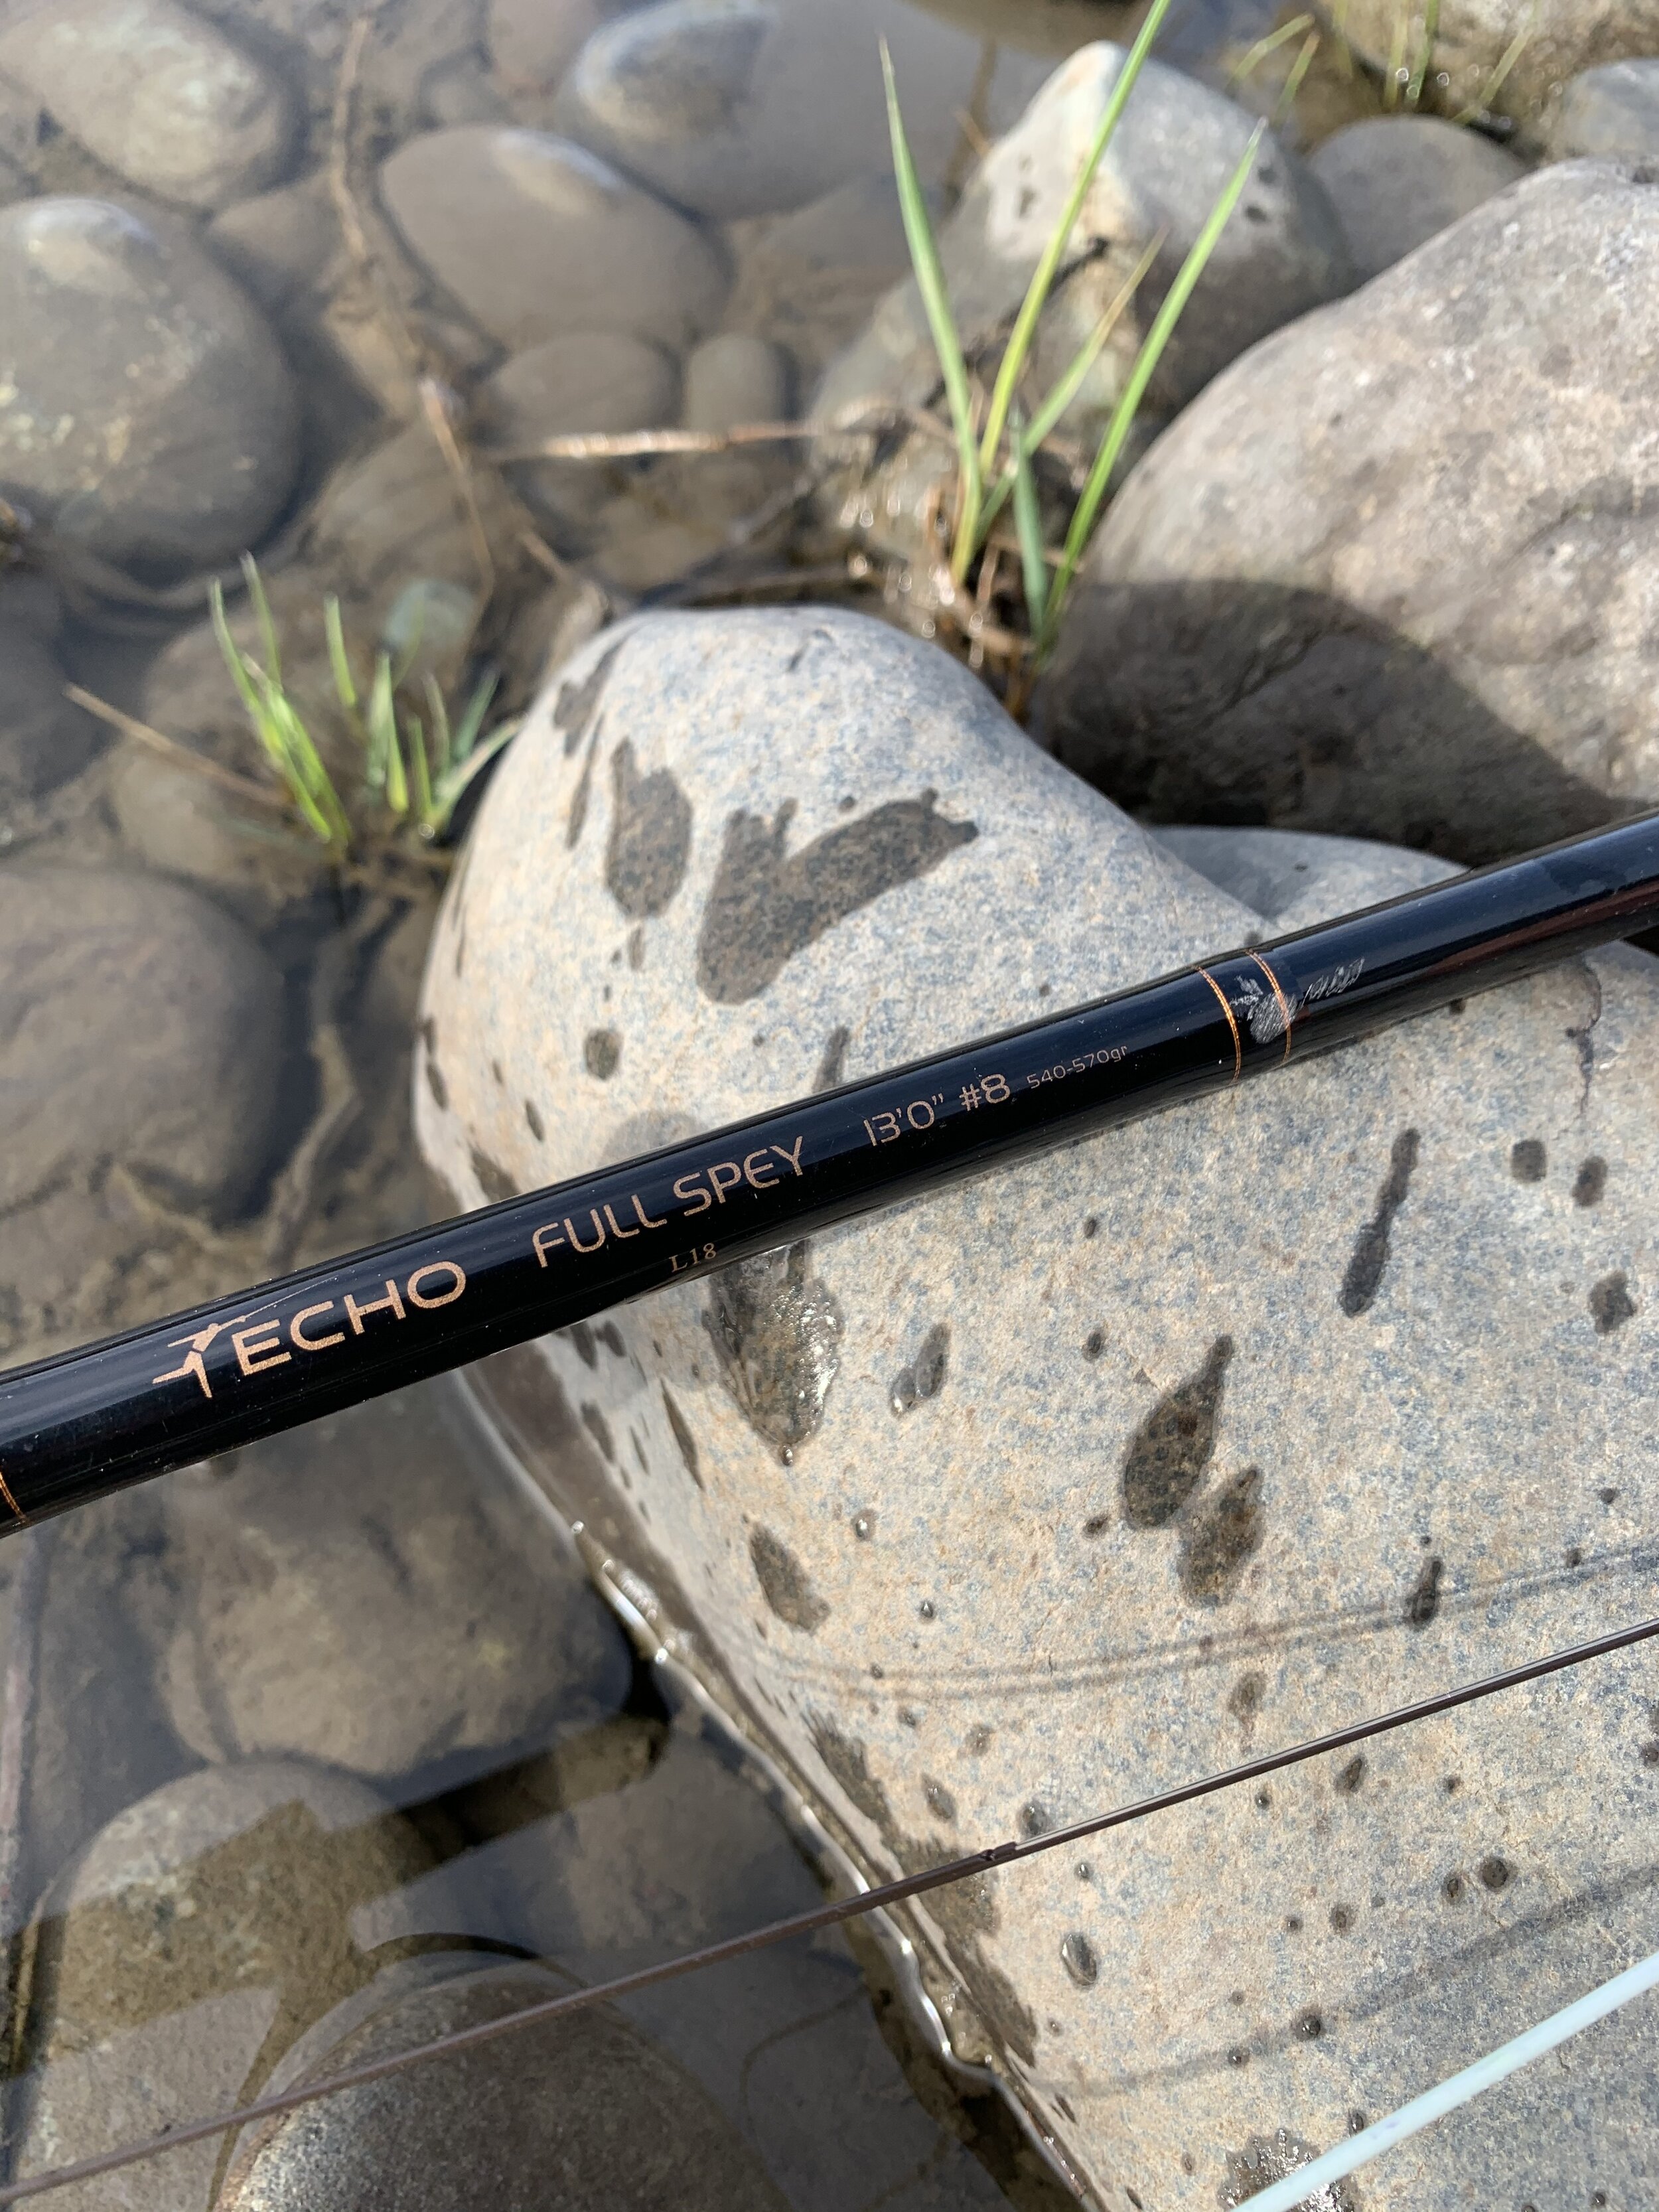 Echo Full Spey 13' 8wt — Feather Forge Fly Co.